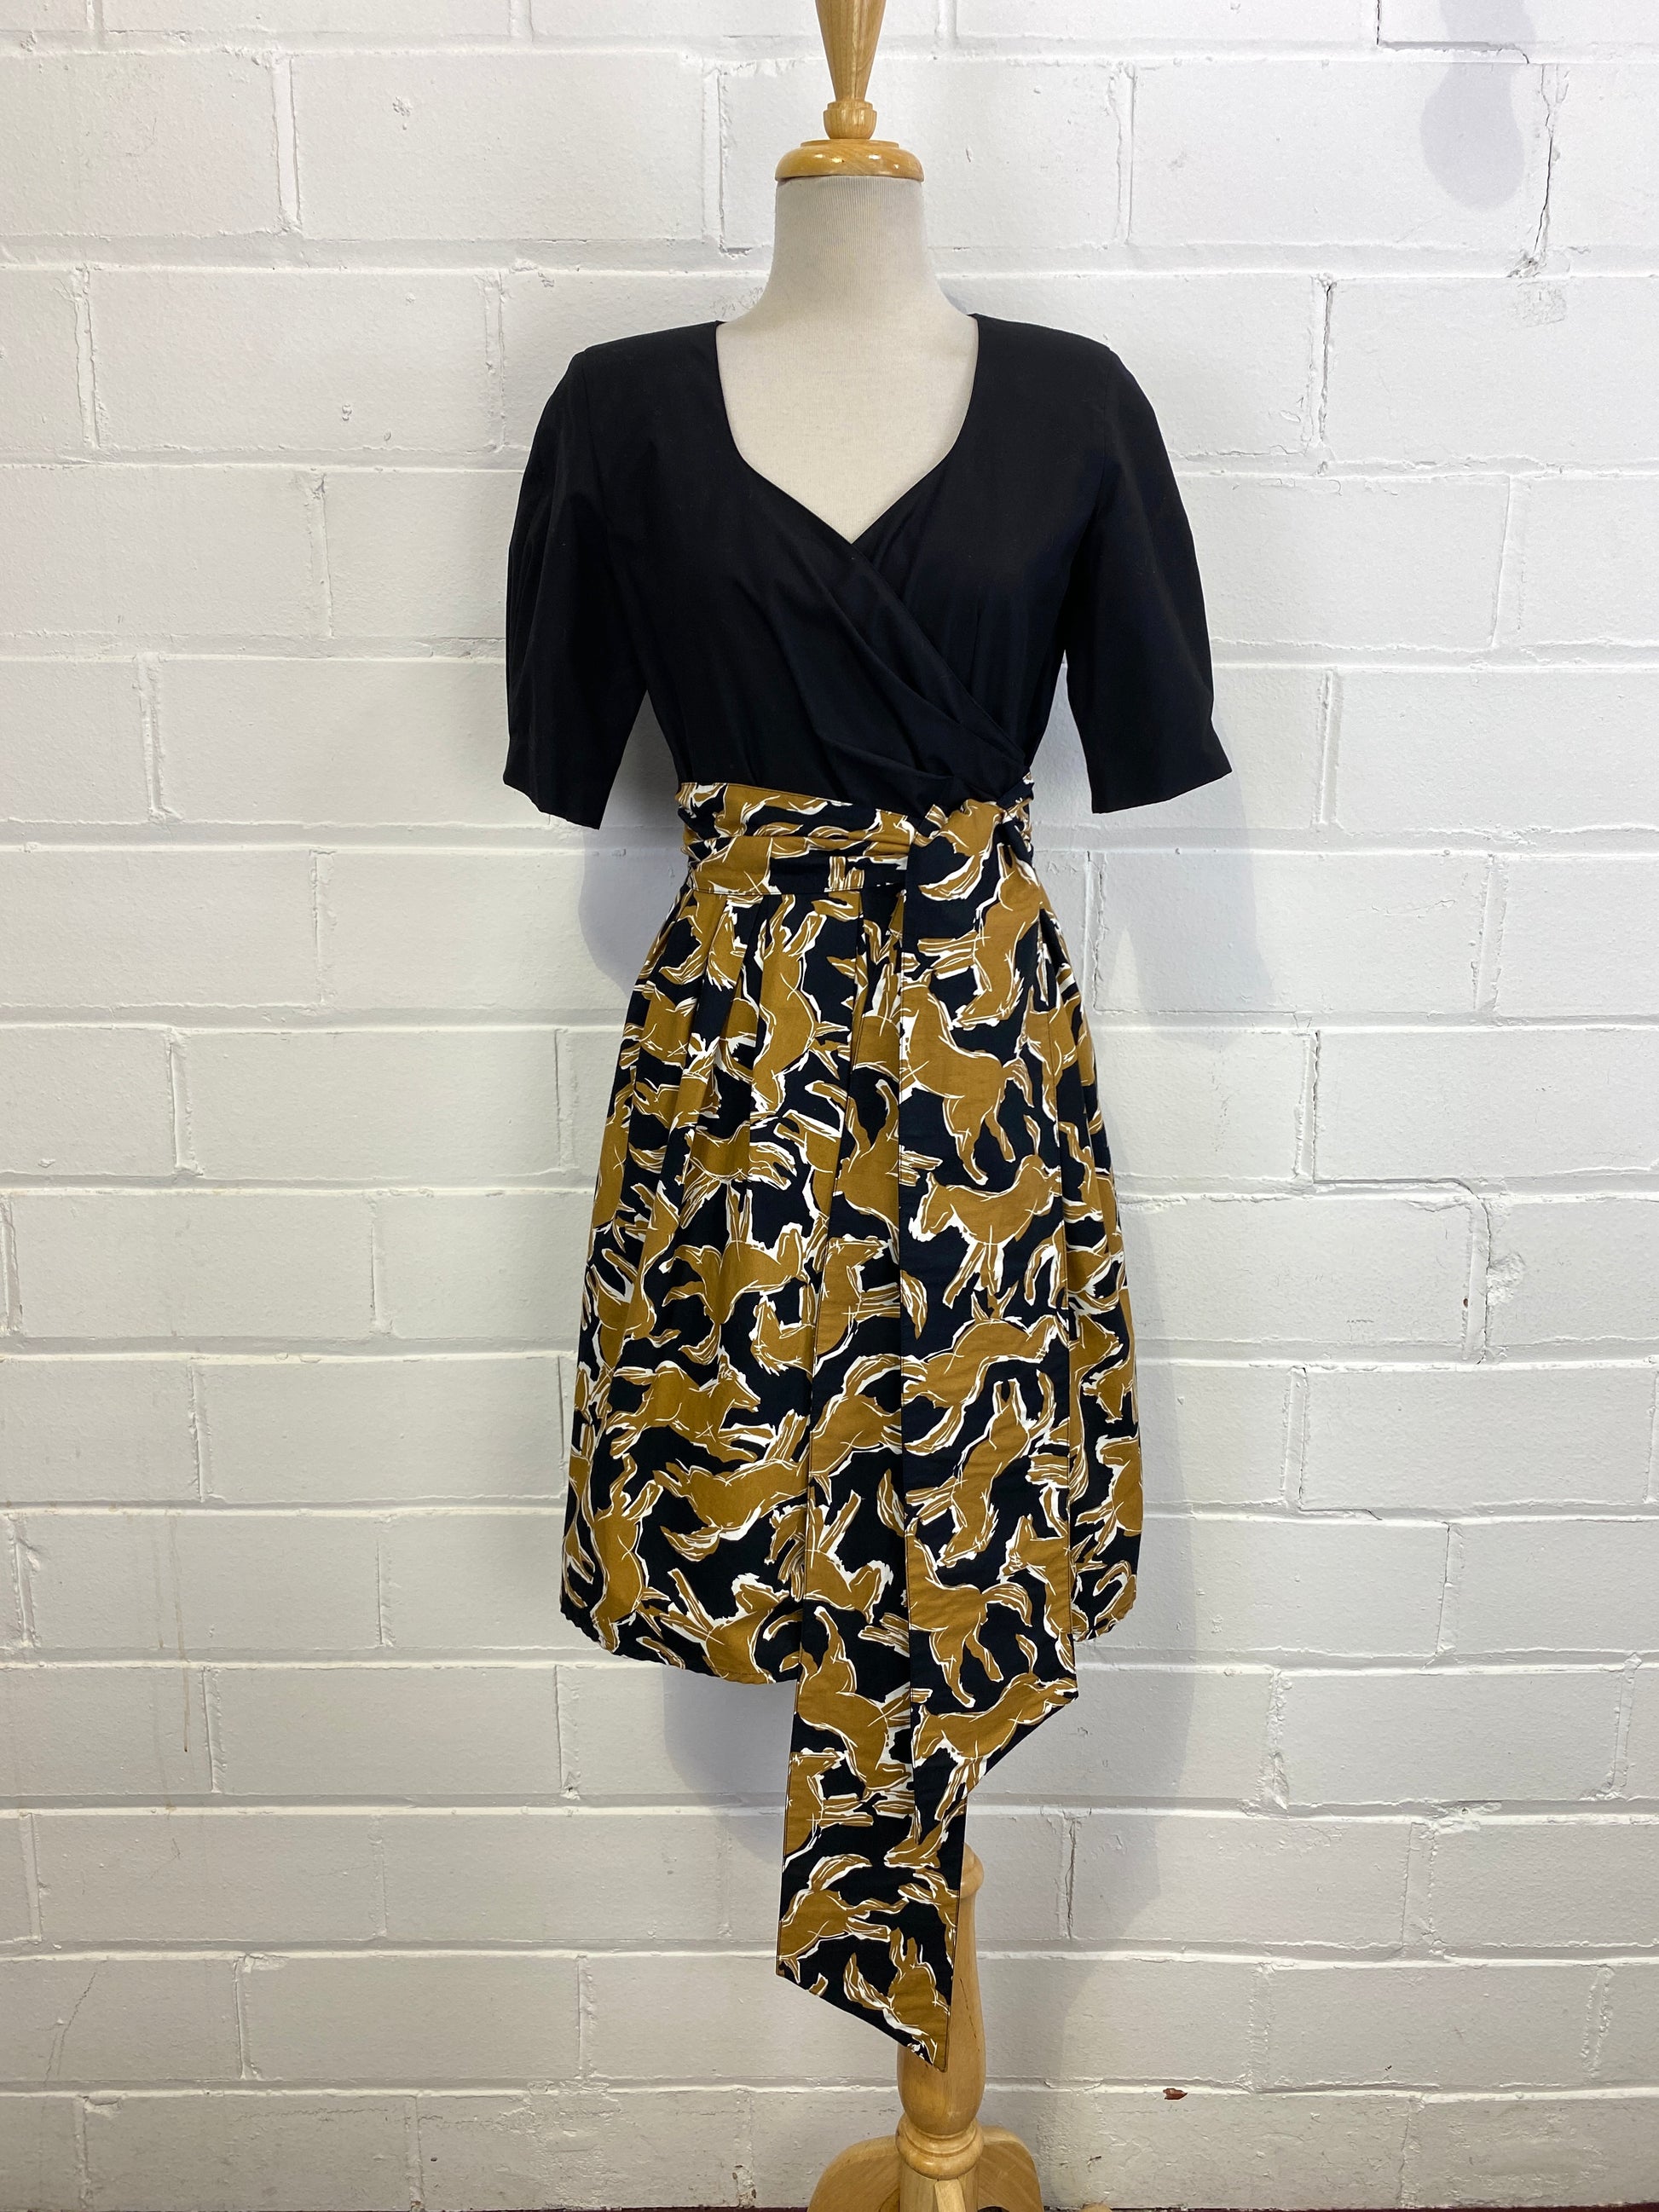 Combined a 60's vintage mod dress pattern with African fabric, and